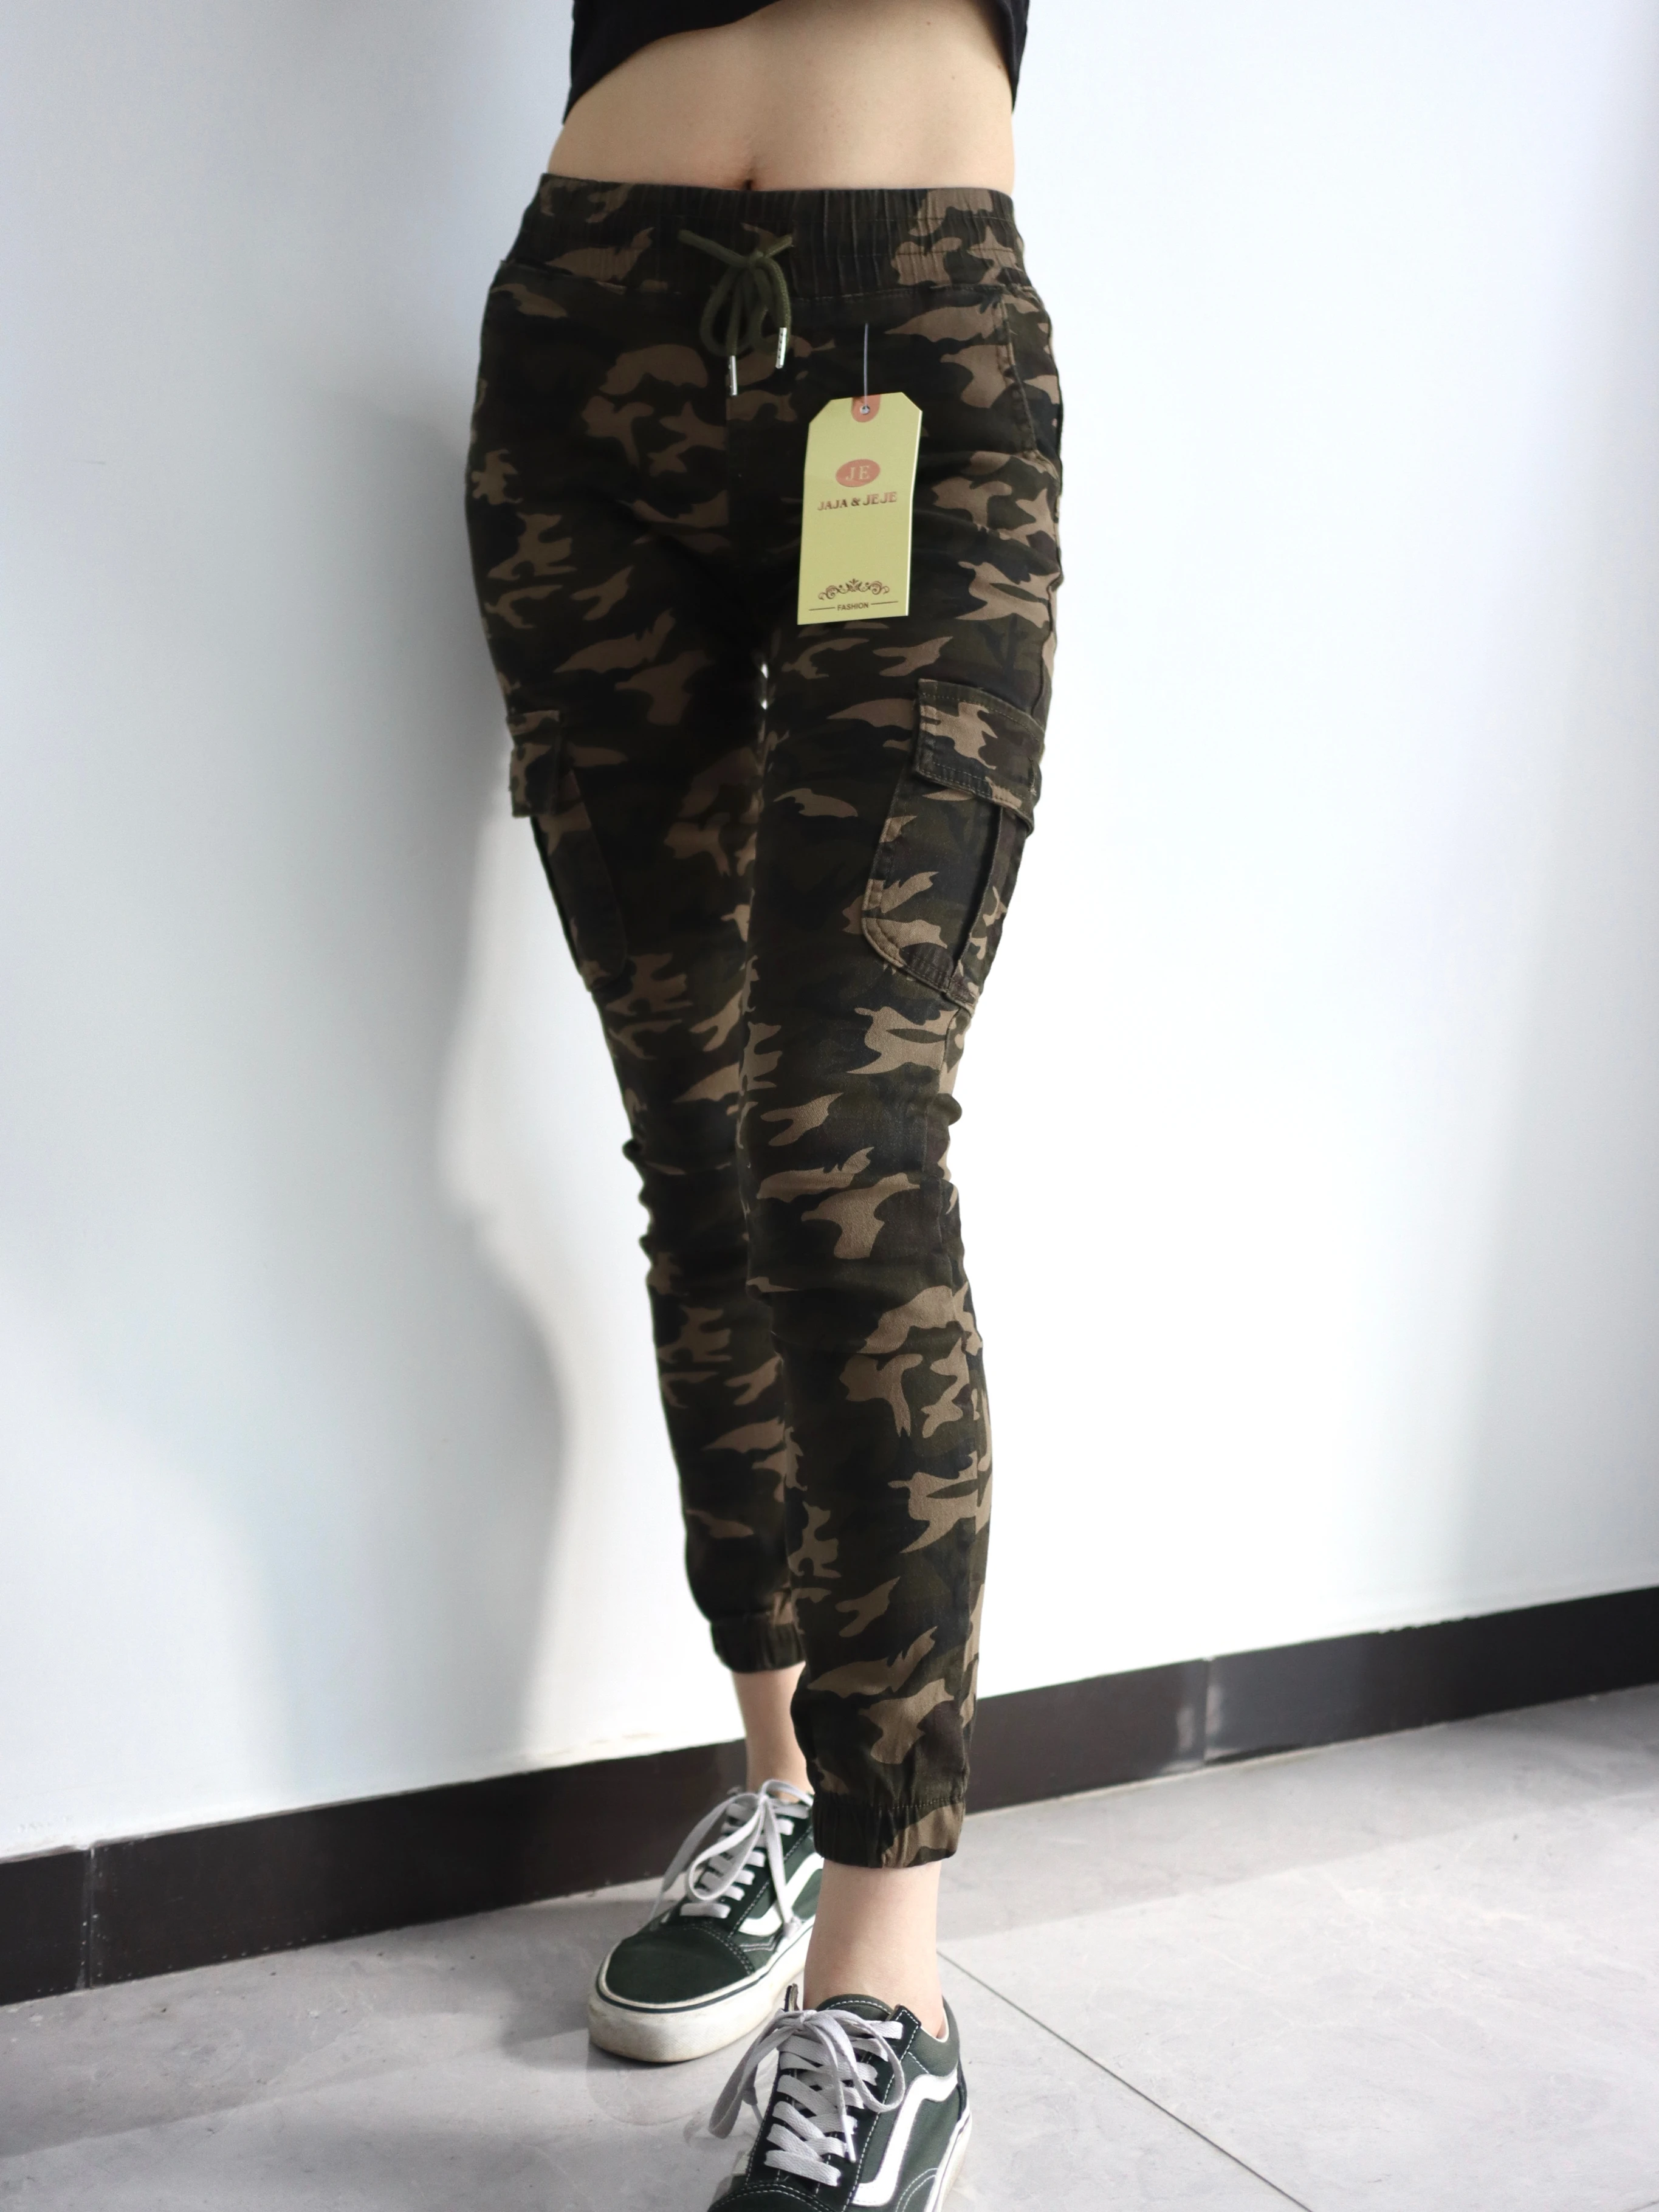 

20223Women Camouflage Trousers Slim Foot Trousers Female Elastic Waist Beam Leisure Trousers Work Trouser Military Pants Jeans